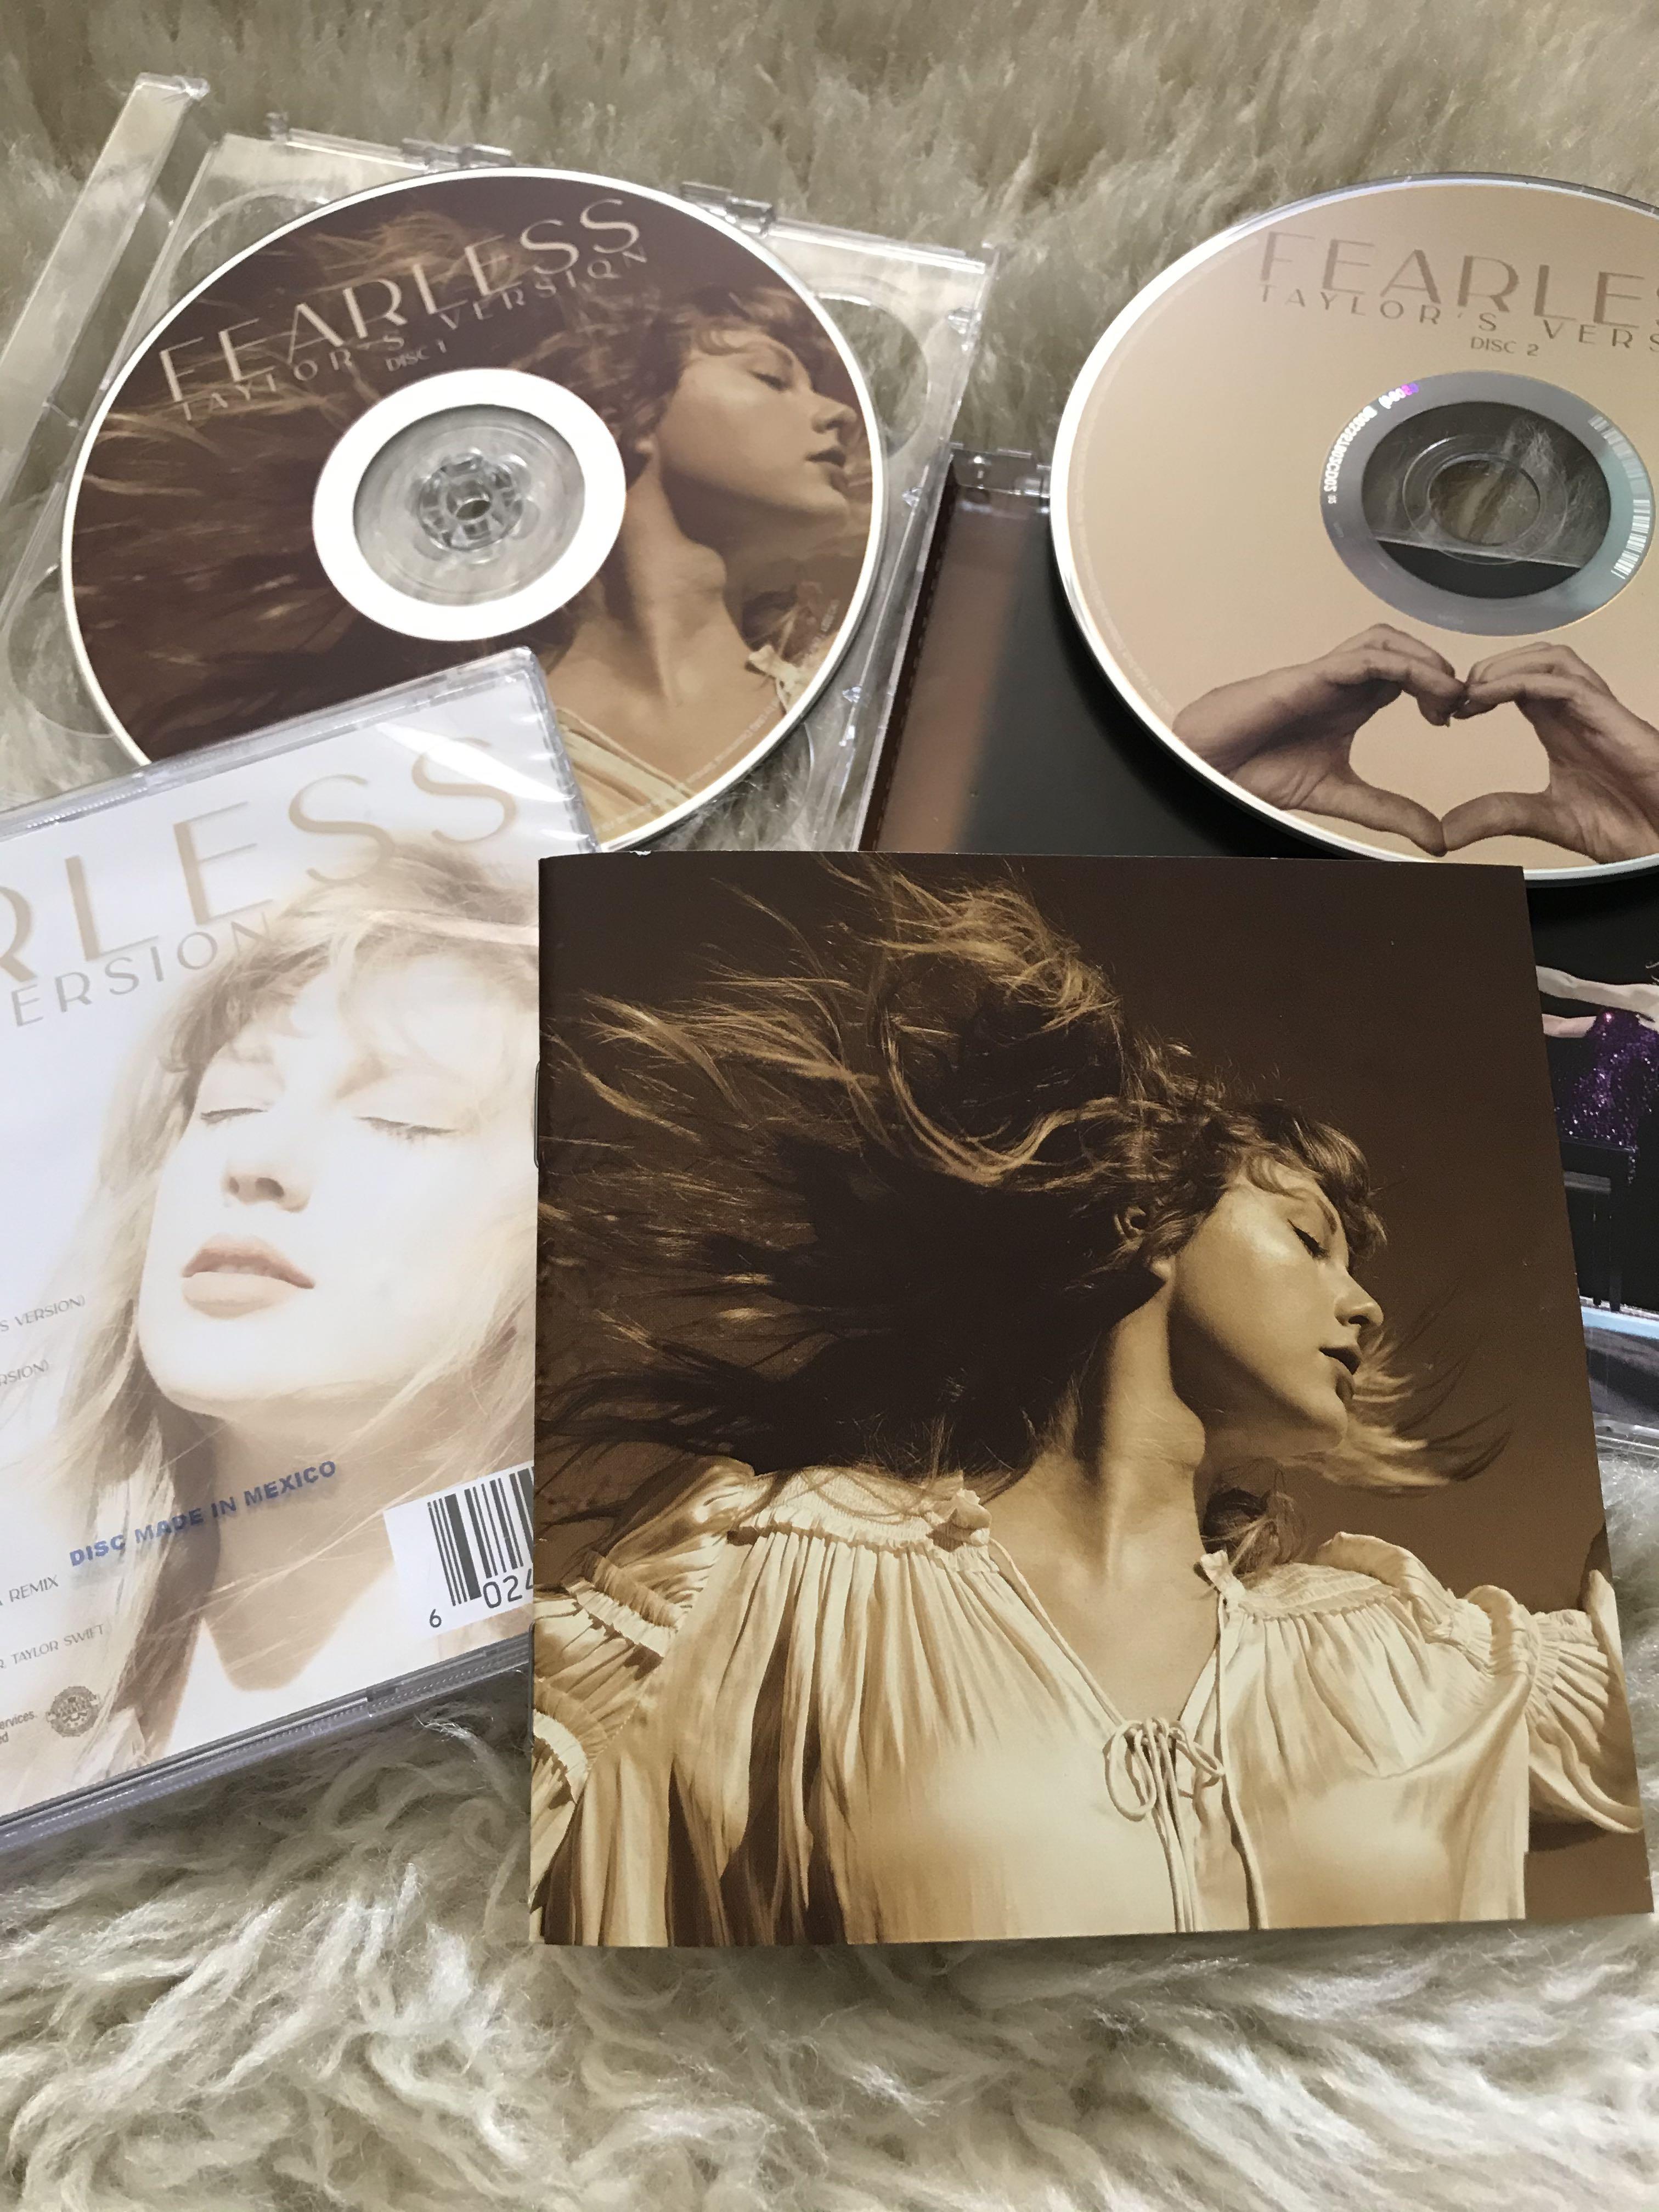 Fearless [Taylor's Version] by Taylor Swift, CD